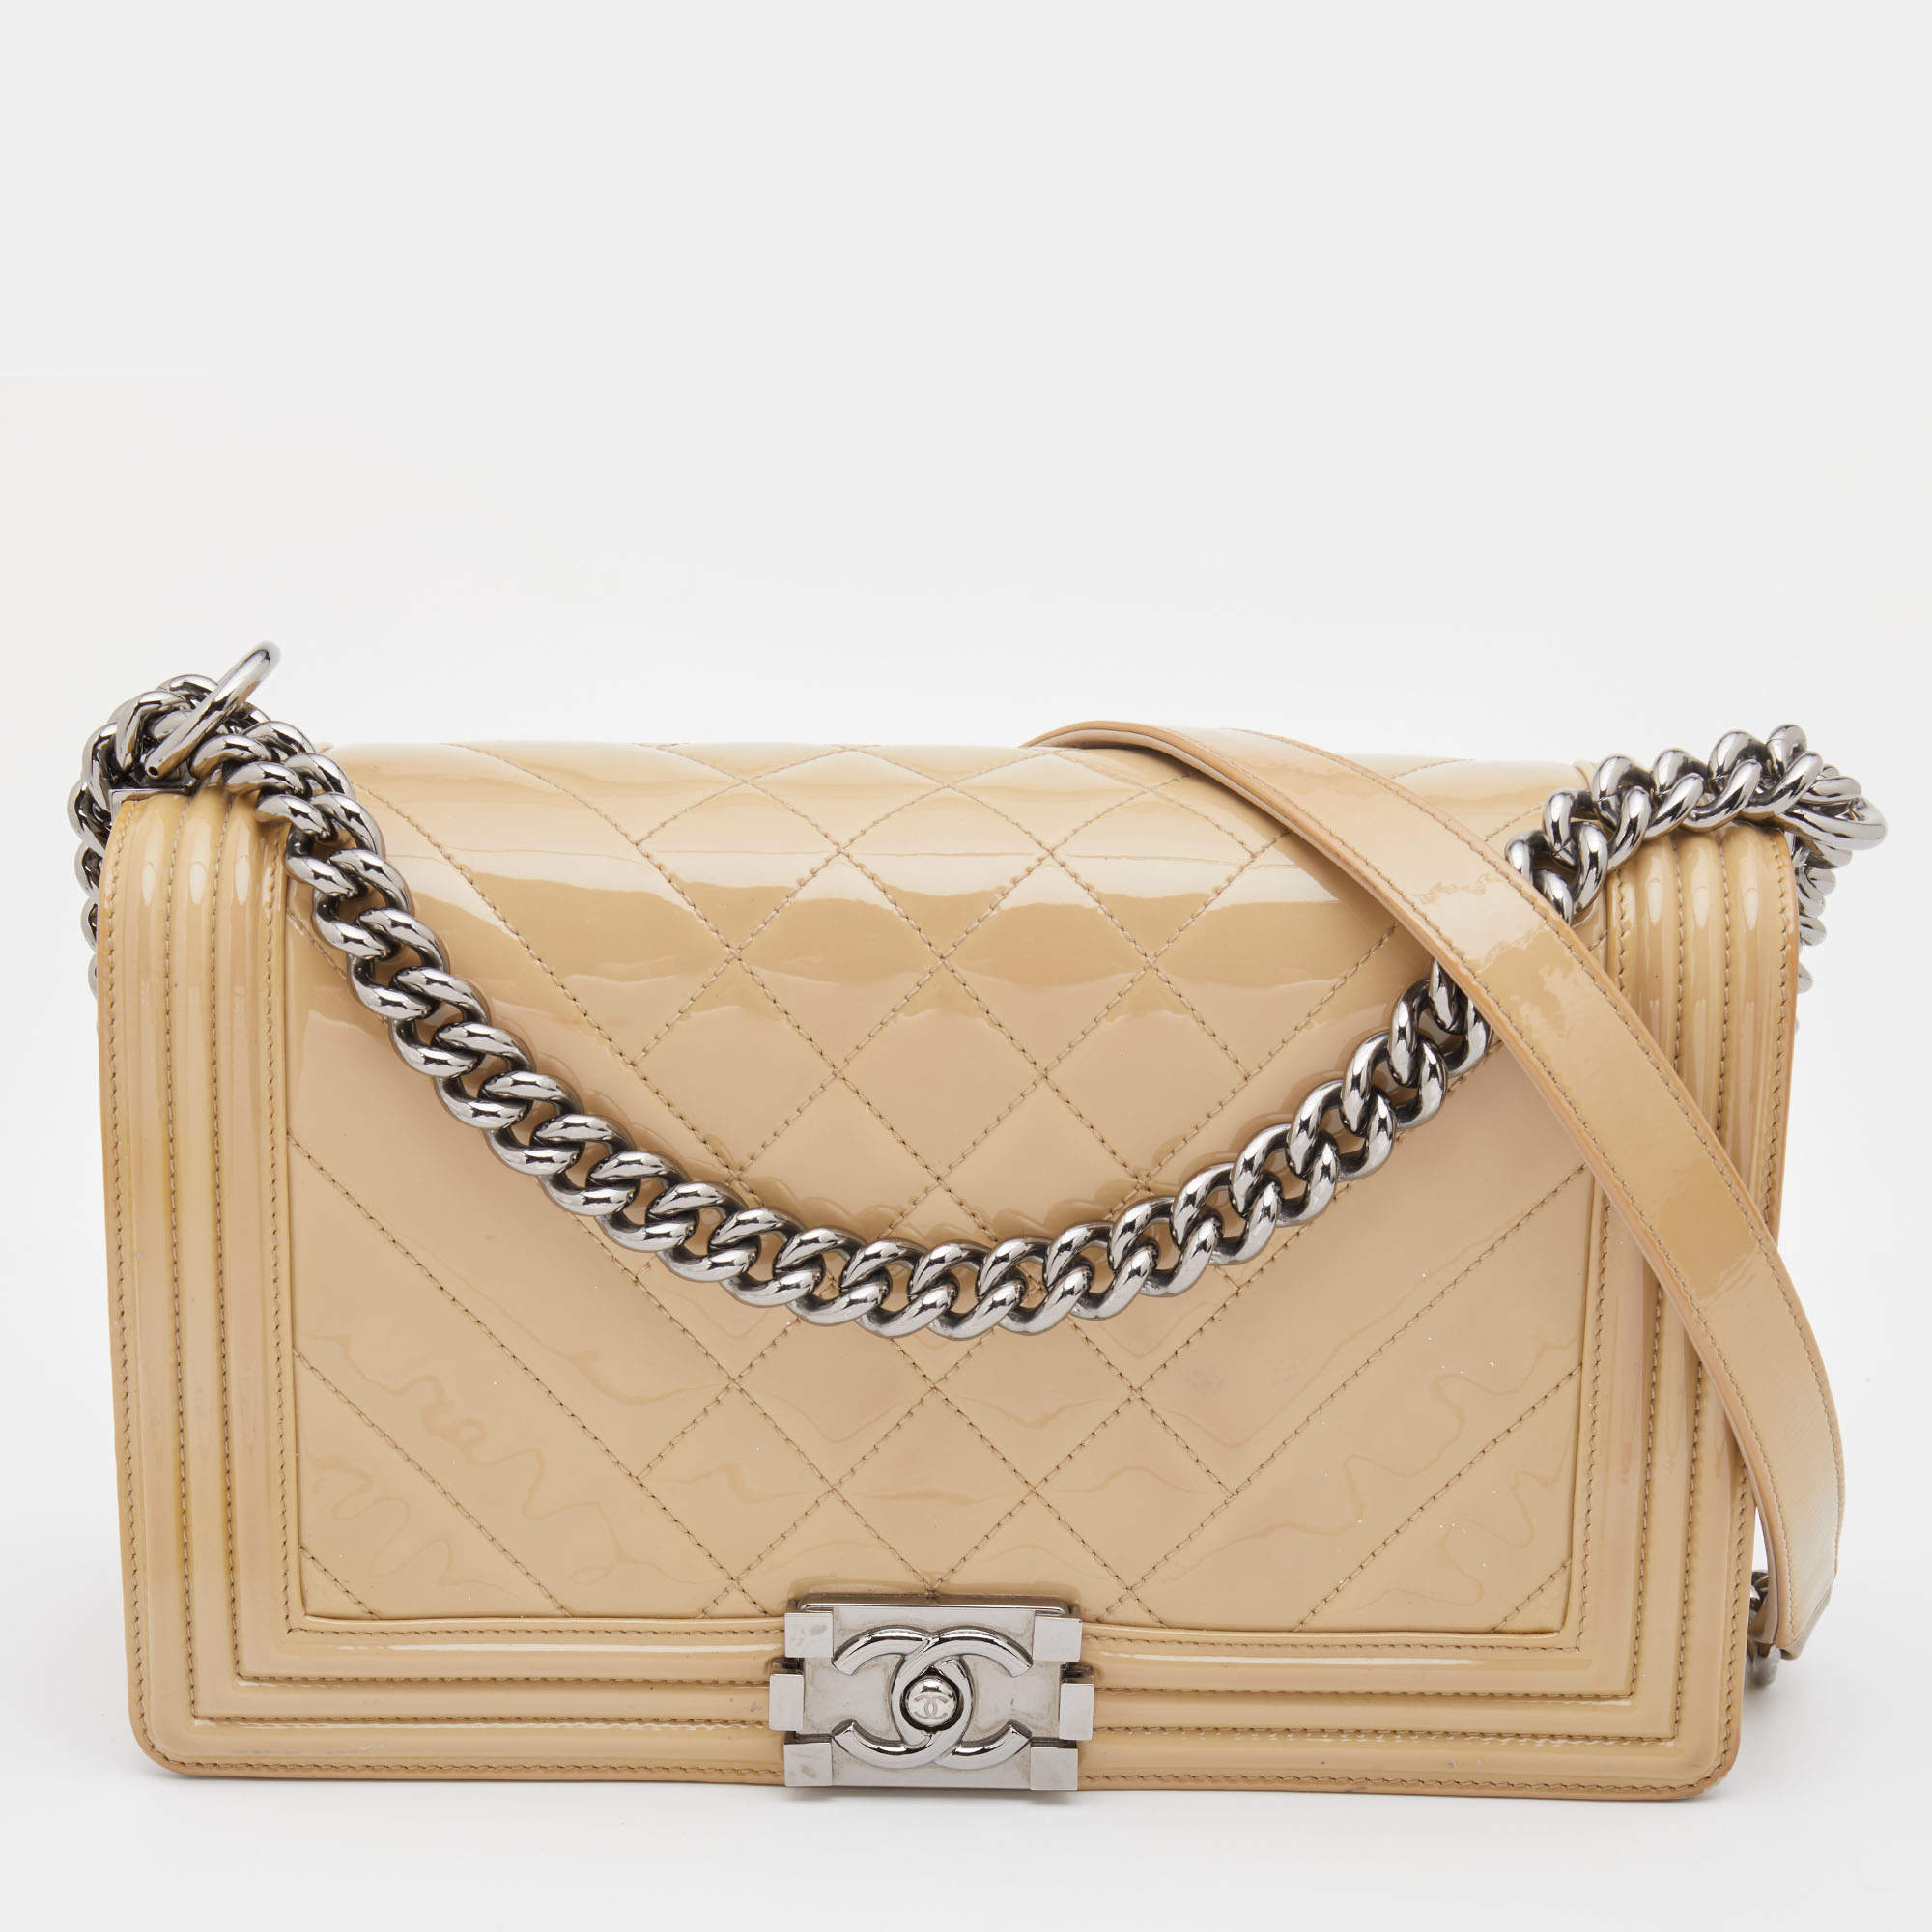 Women  Bags  Clutch bags  Chanel Classic Double Flap Bag Medium Beige   The Real Luxury